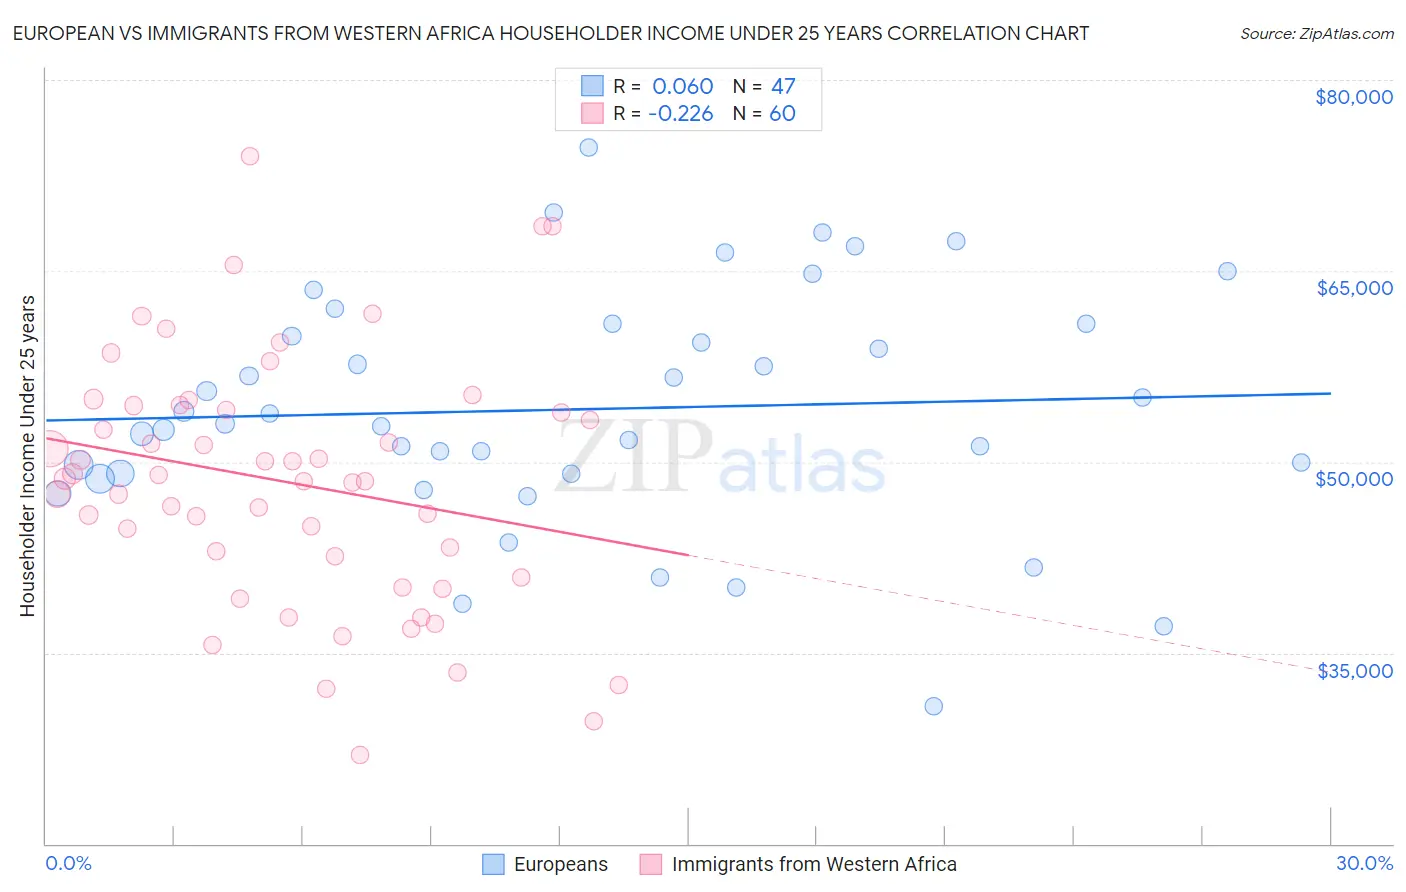 European vs Immigrants from Western Africa Householder Income Under 25 years